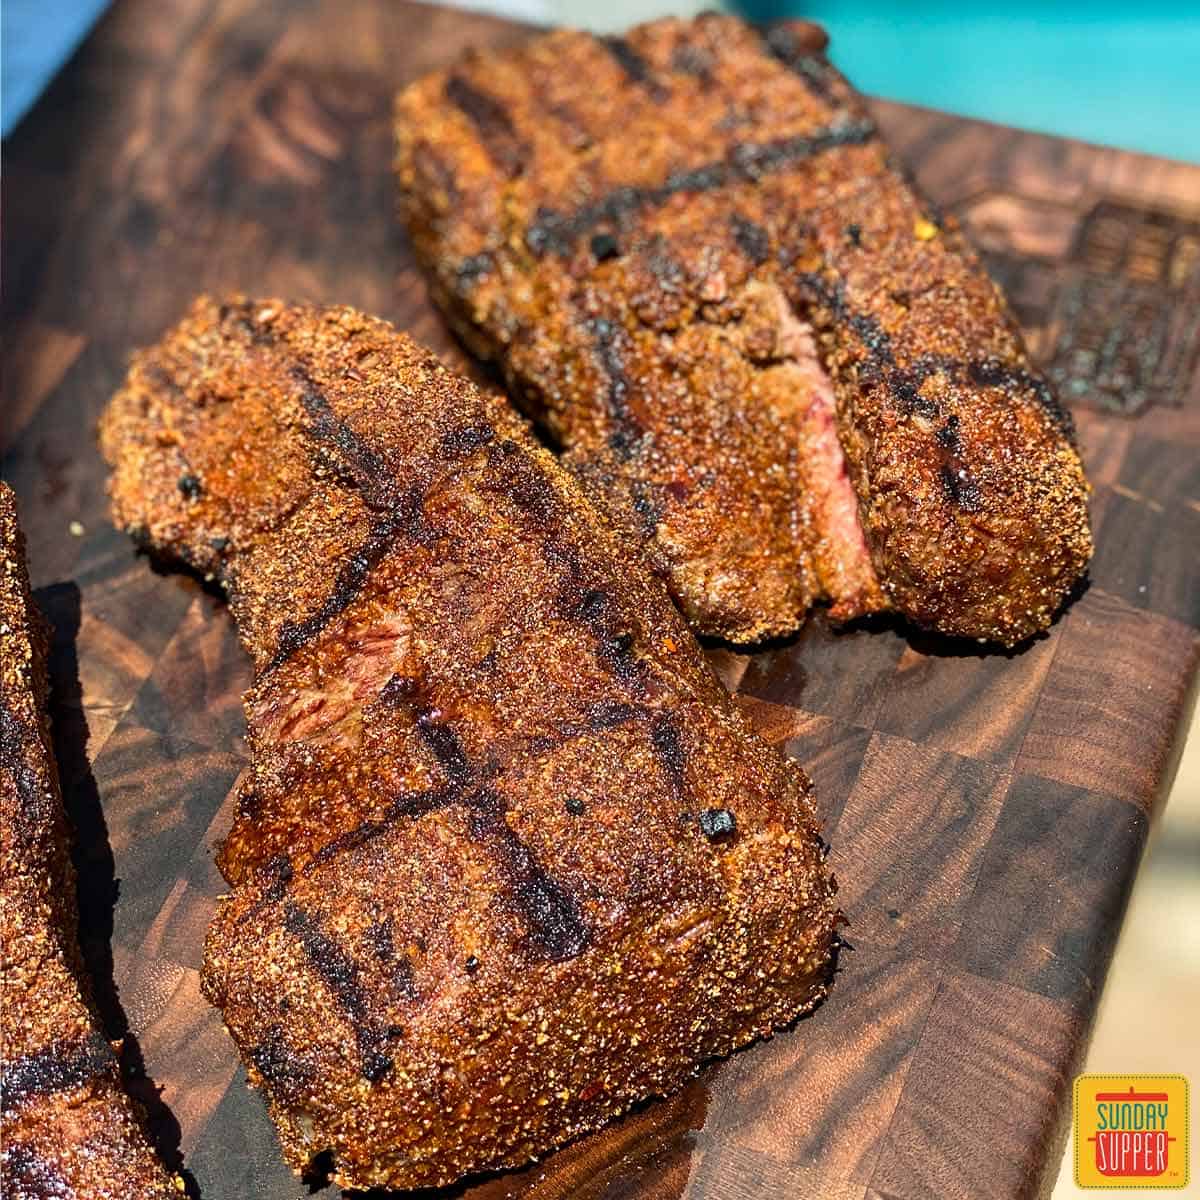 Grilled beef short ribs coated with dry rub for steak on a dark brown cutting board